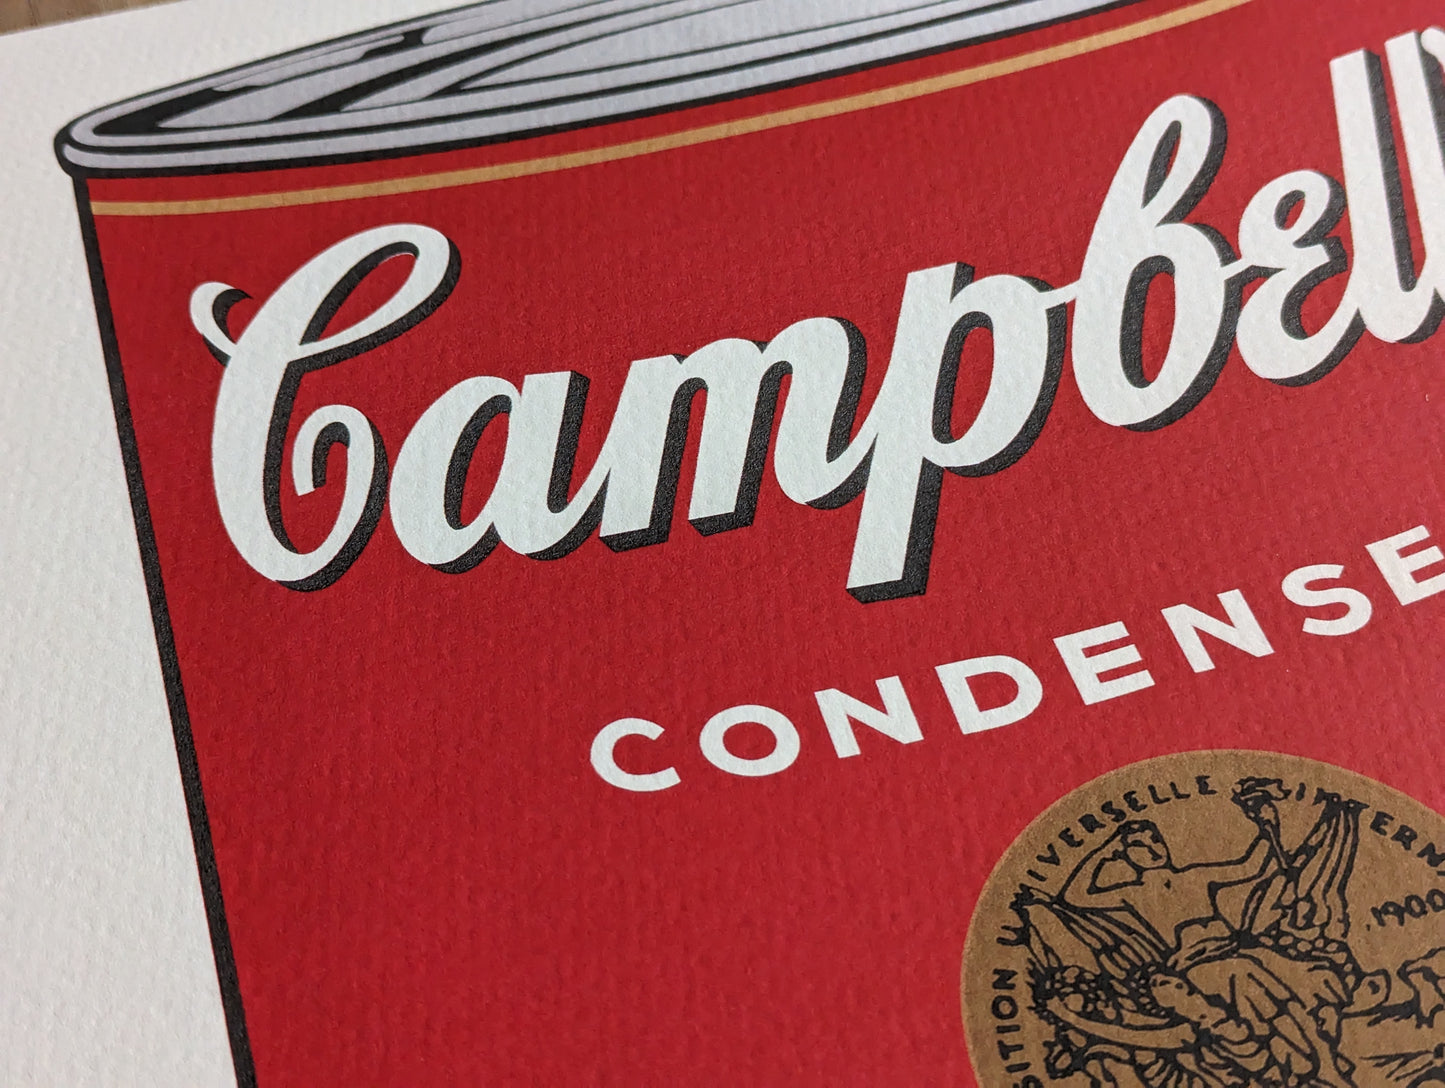 Andy Warhol - Campbell's soup II (1980)